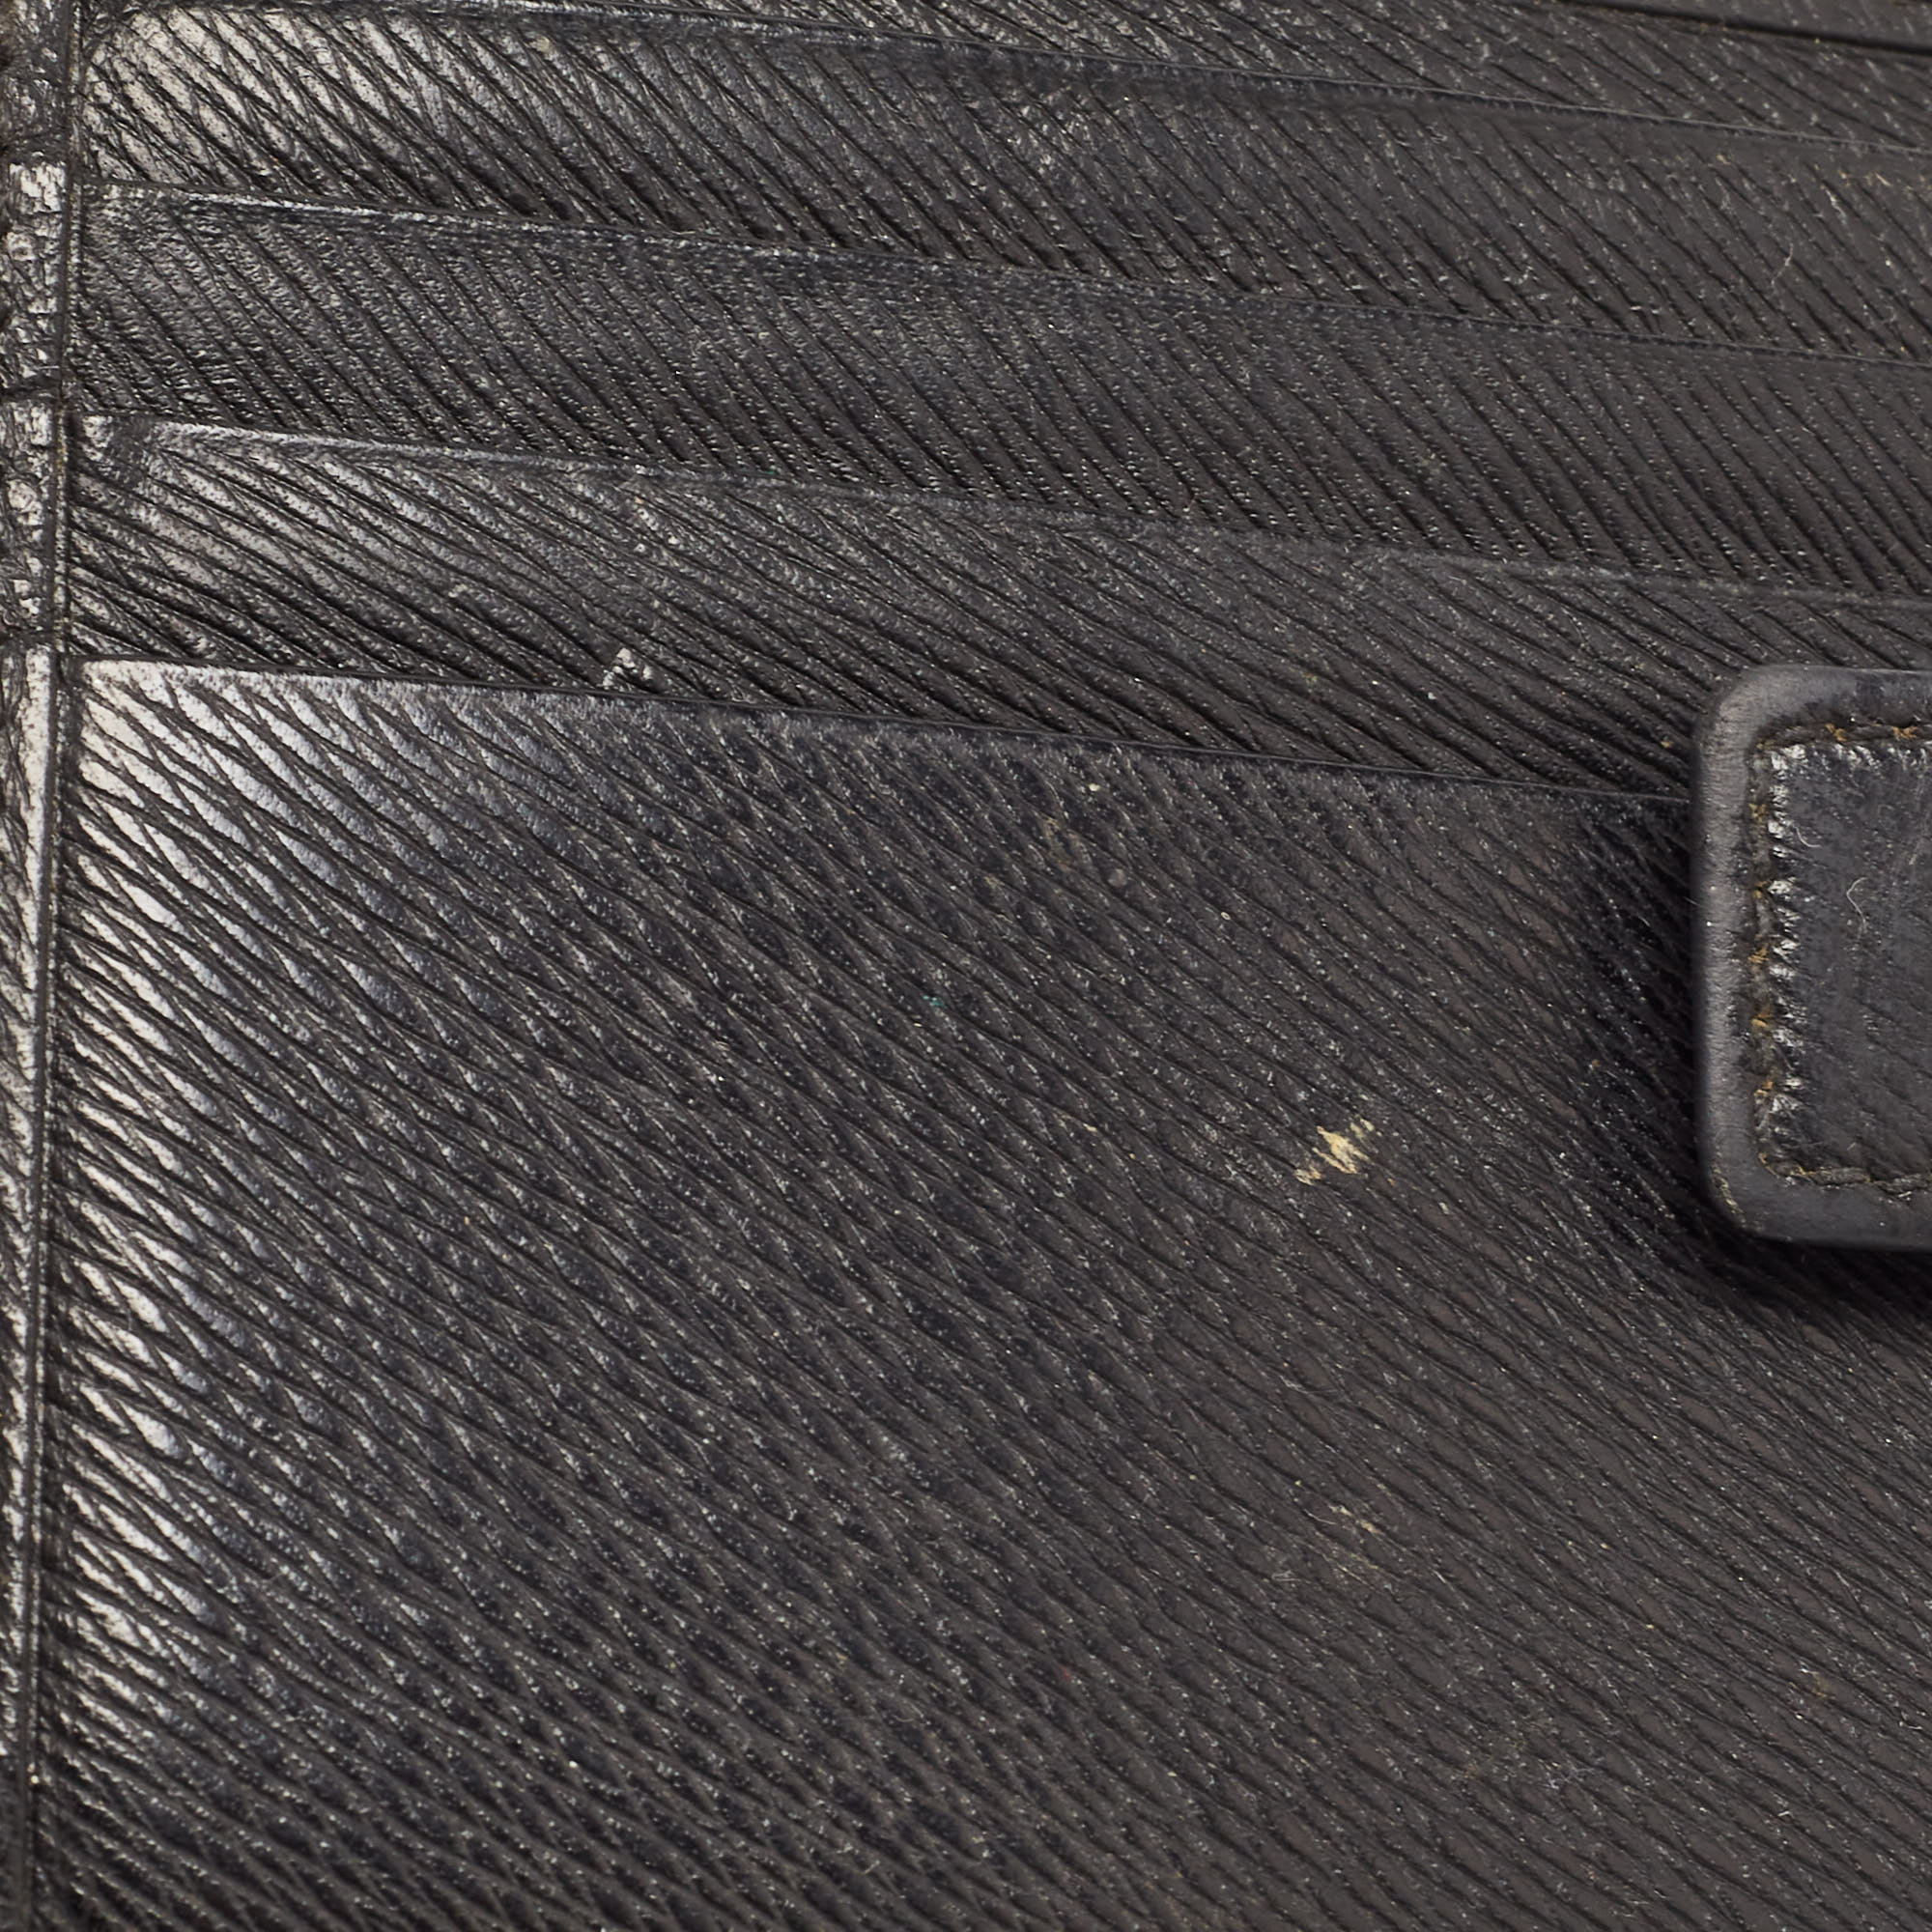 Givenchy Black Leather Bifold Flap Wallet